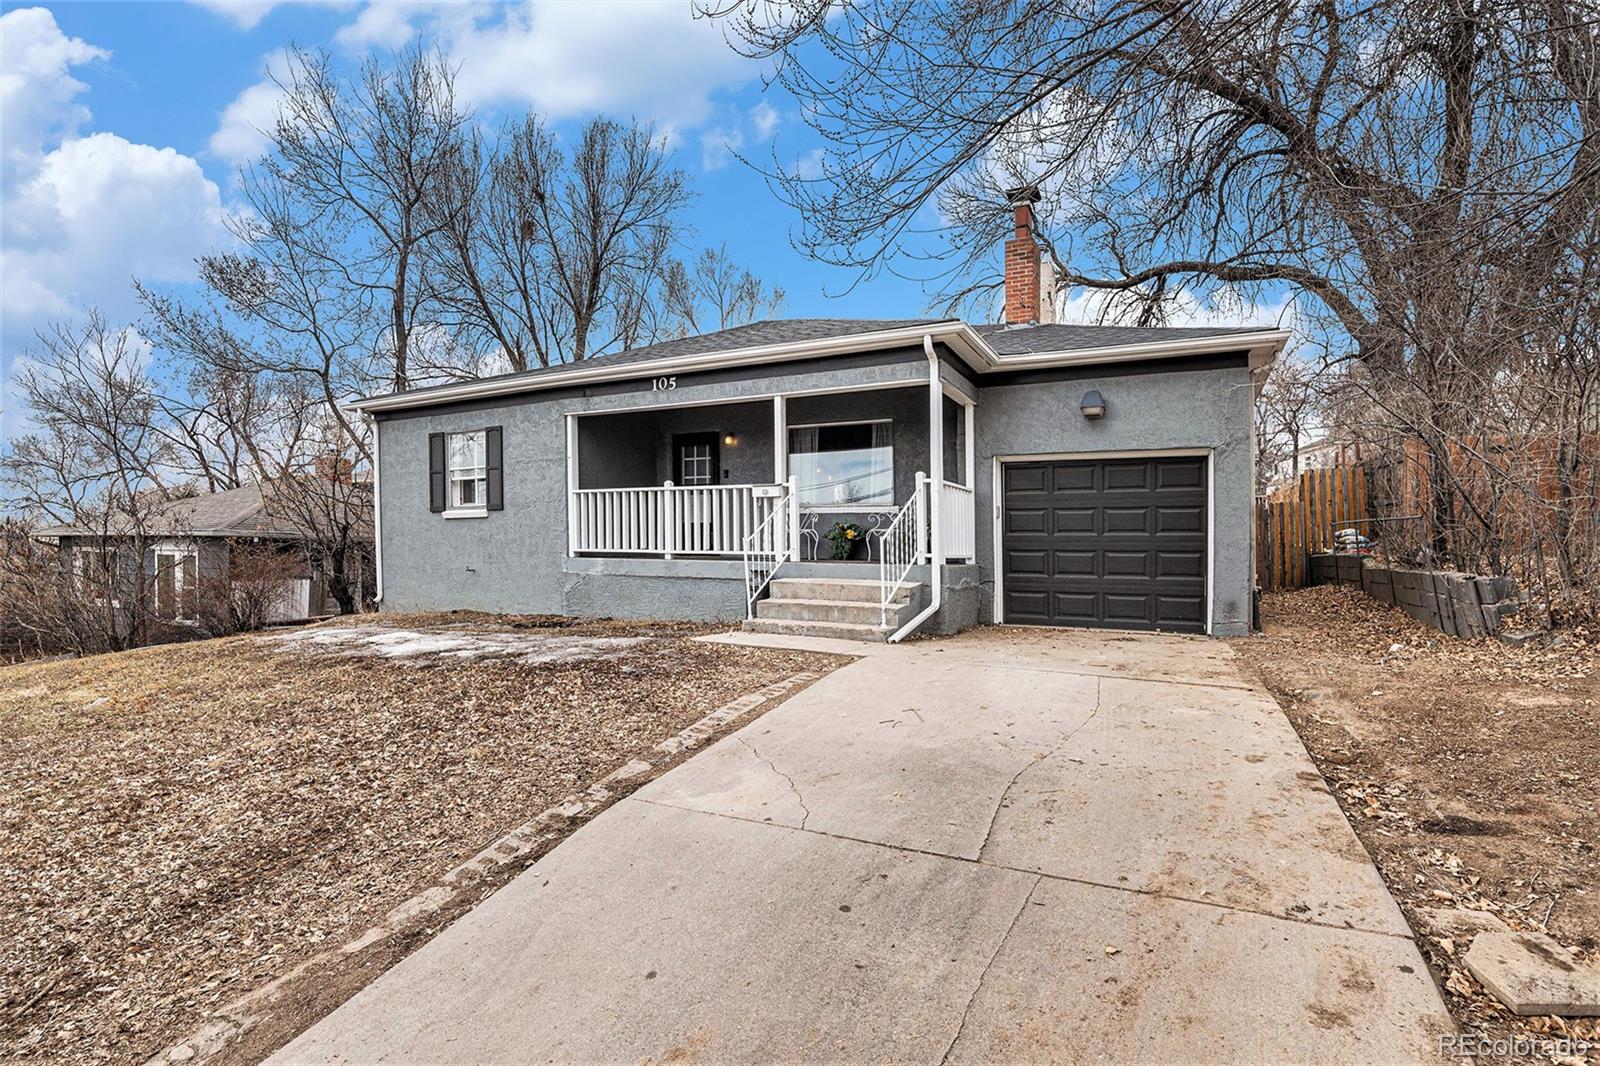 105 w brookside street, colorado springs sold home. Closed on 2024-05-17 for $380,525.